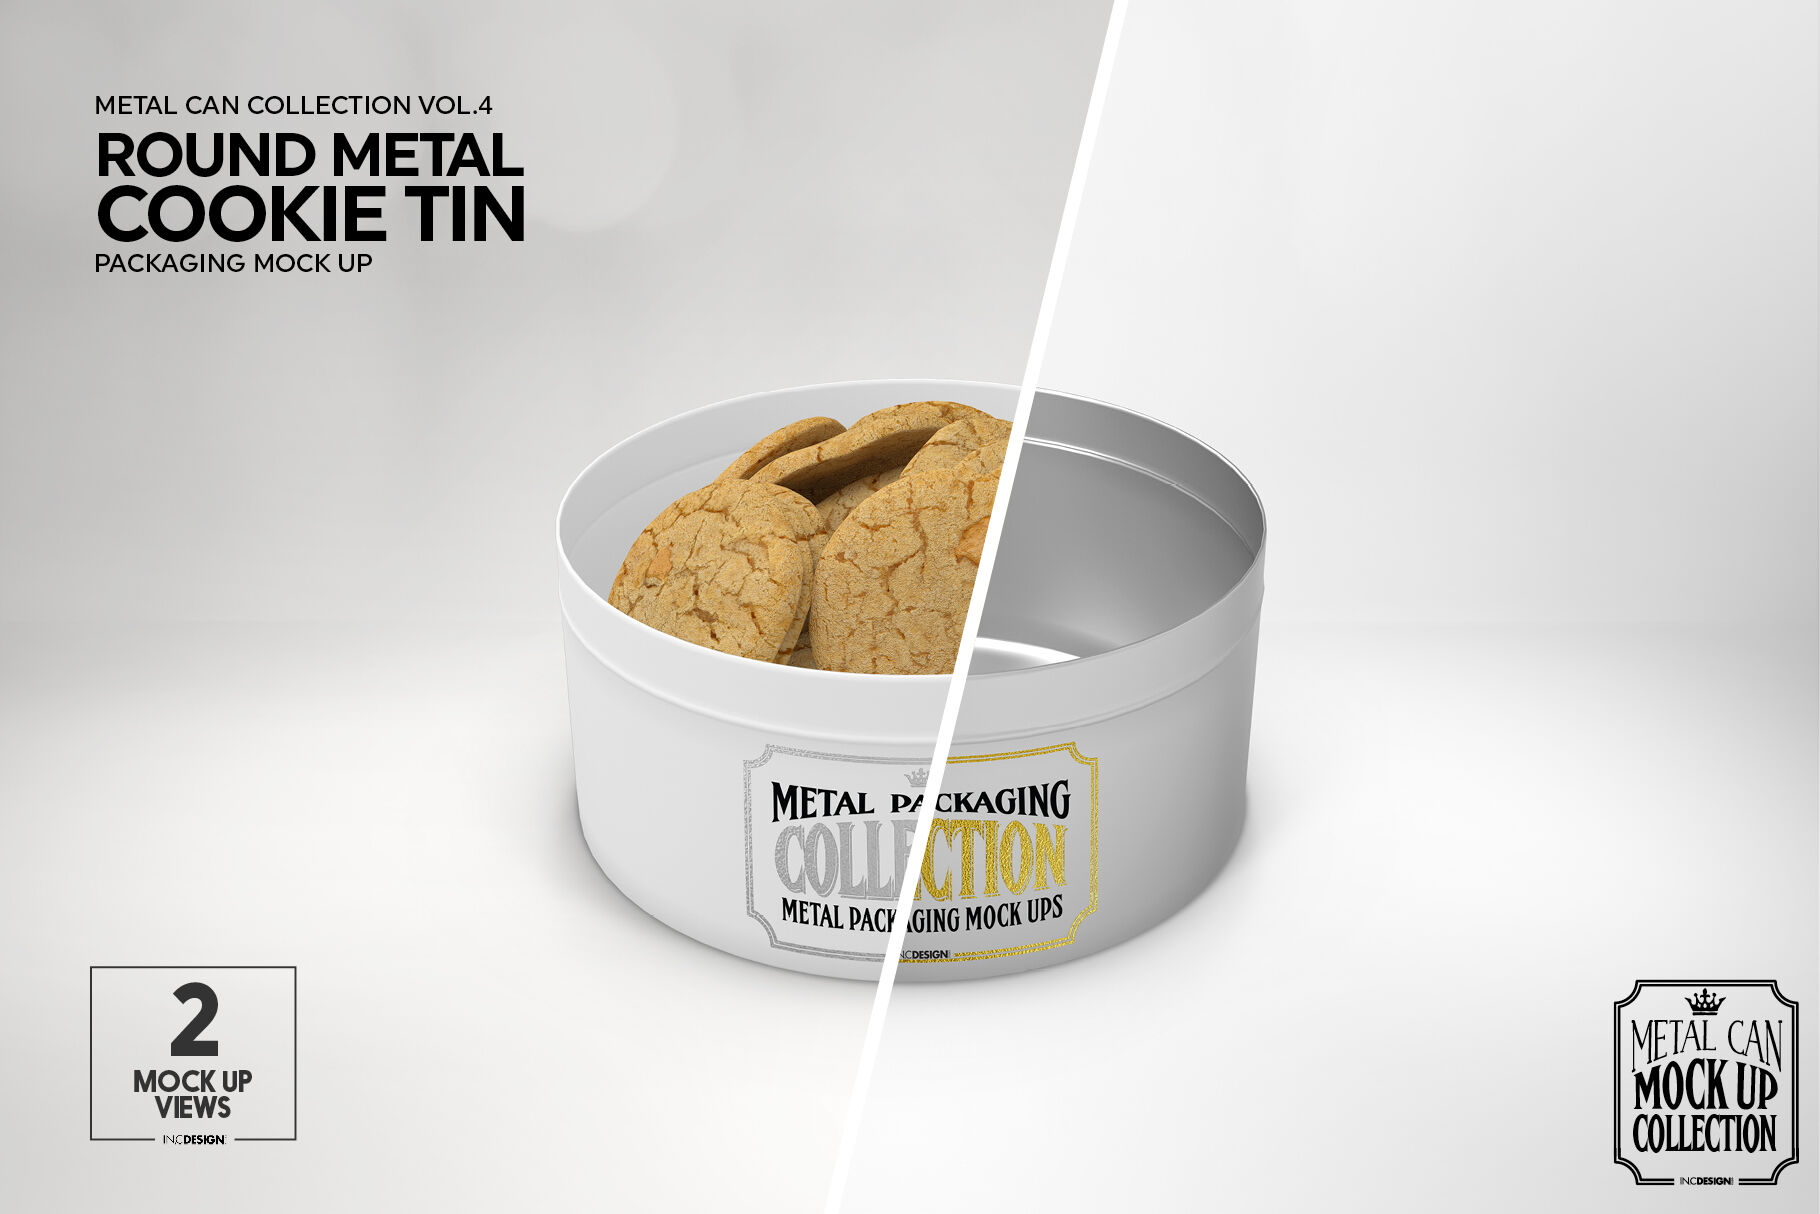 Metal Round Cookie Tin Packaging Mockup By INC Design ...